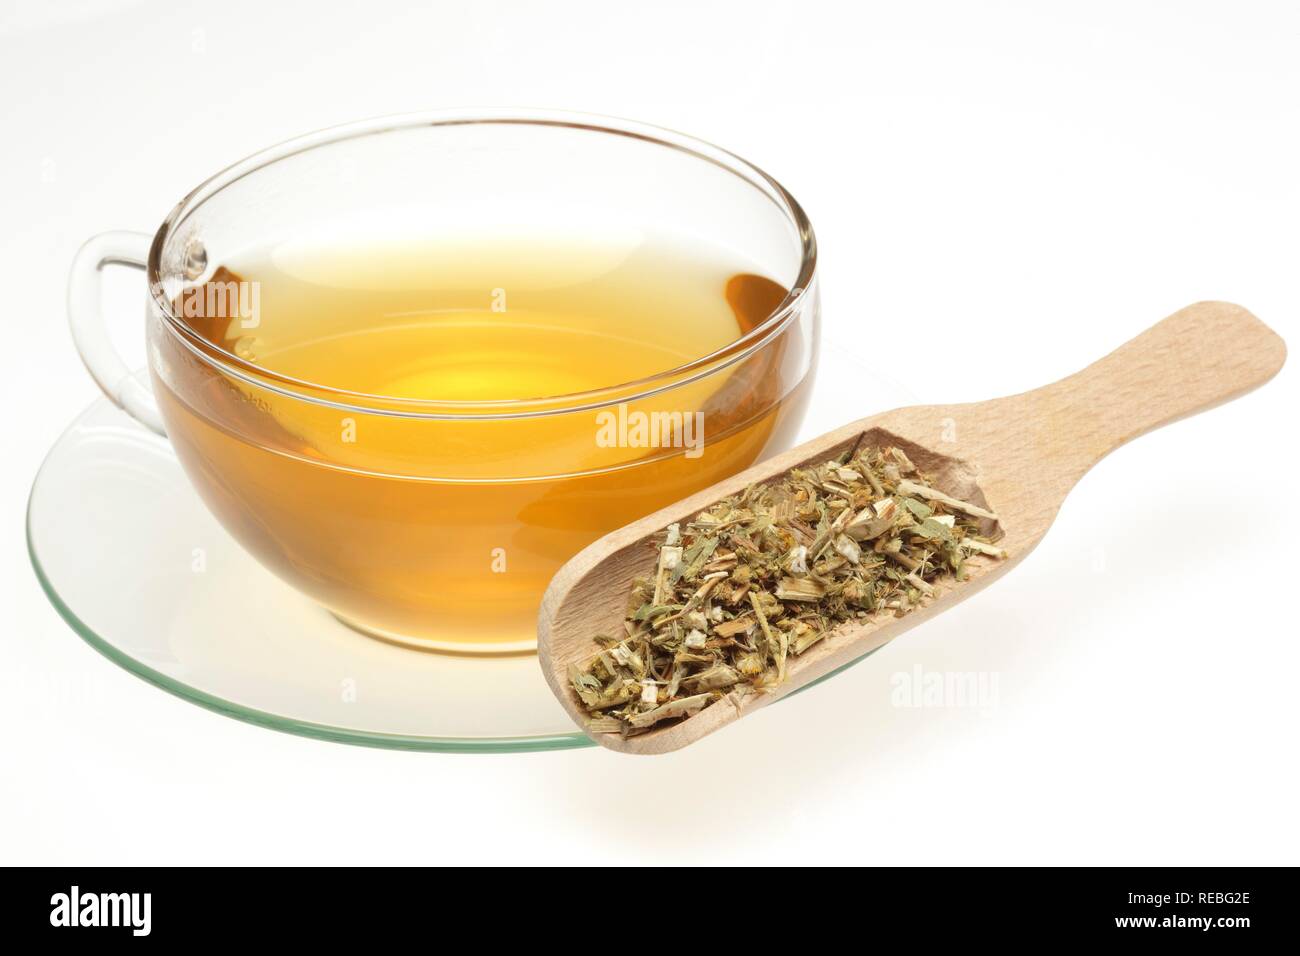 Herbal tea made of the medicinal plant Canadian Golden-rod (Solidago canadensis) Stock Photo